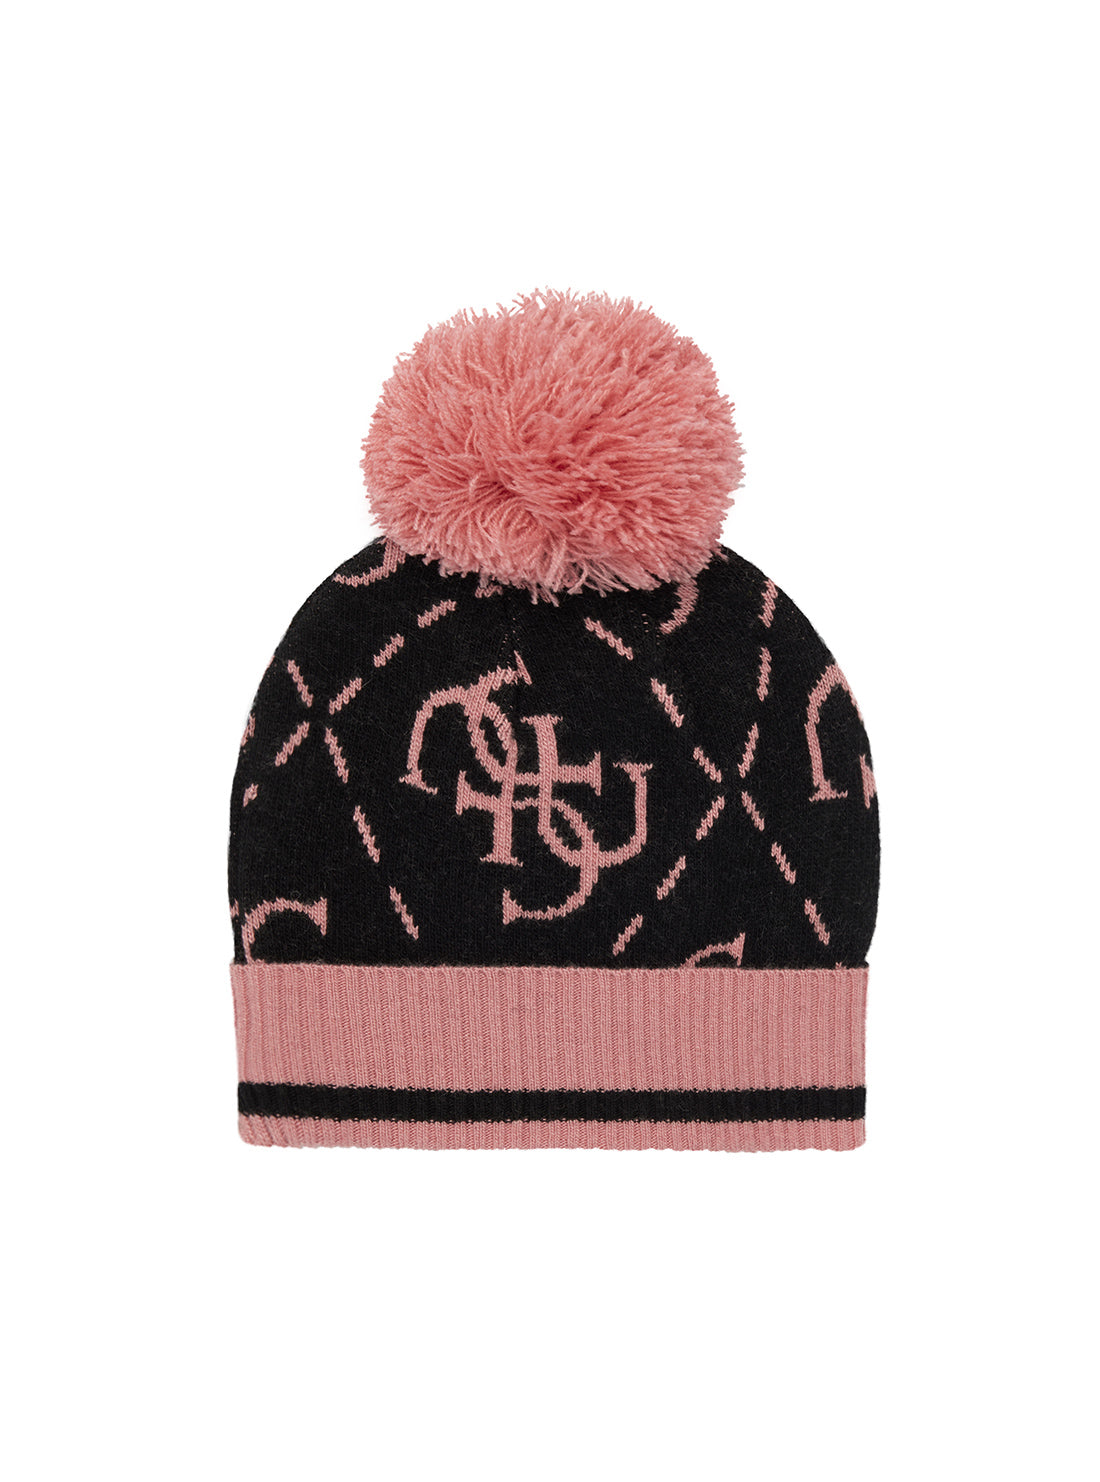 Pink and Black Logo Beanie | GUESS Women's Apparel | front view